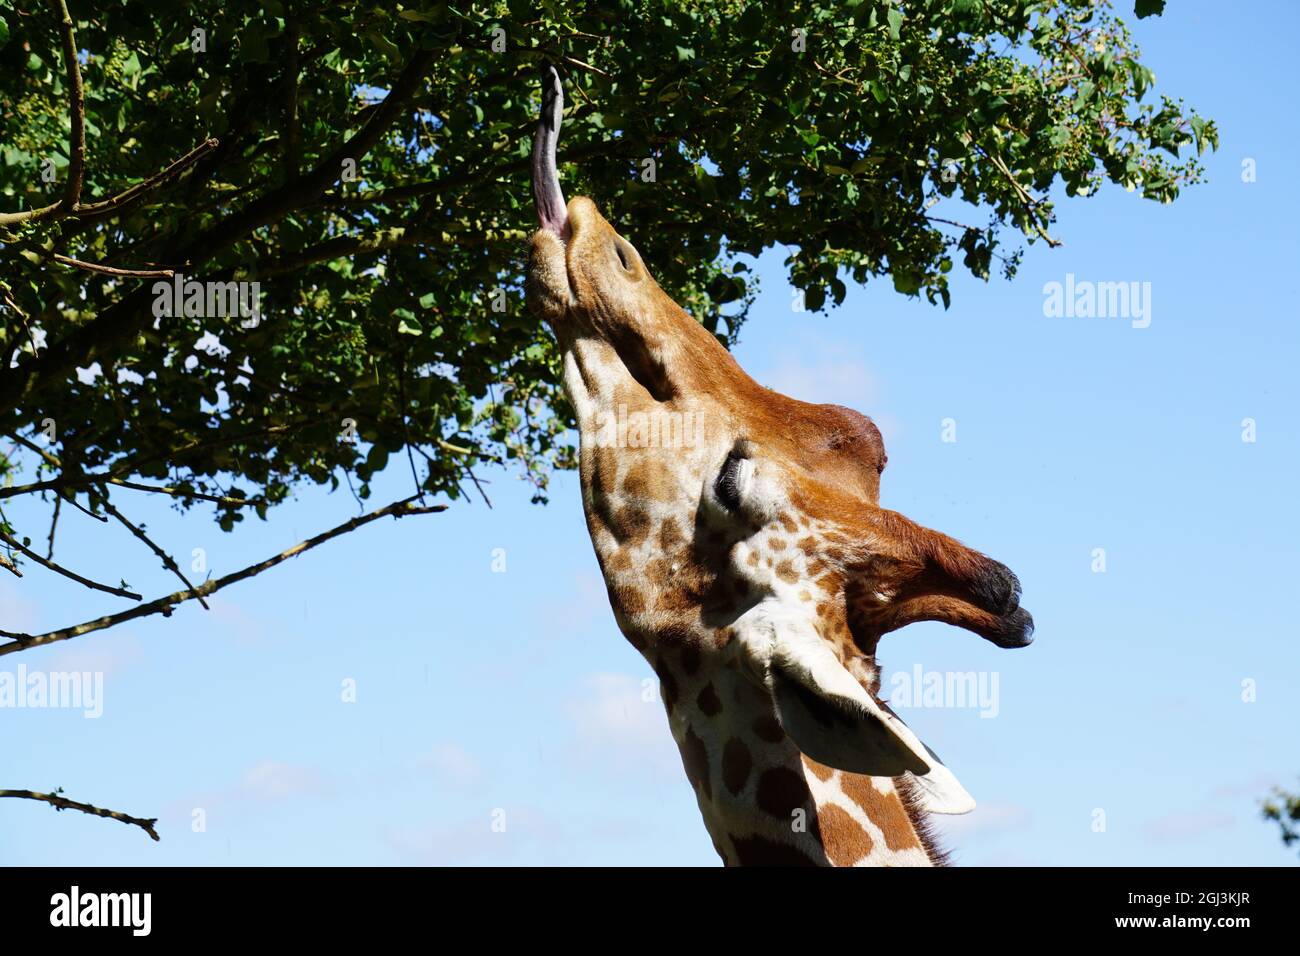 closeup on a giraffe head with tongue catching leaves on tree Stock Photo